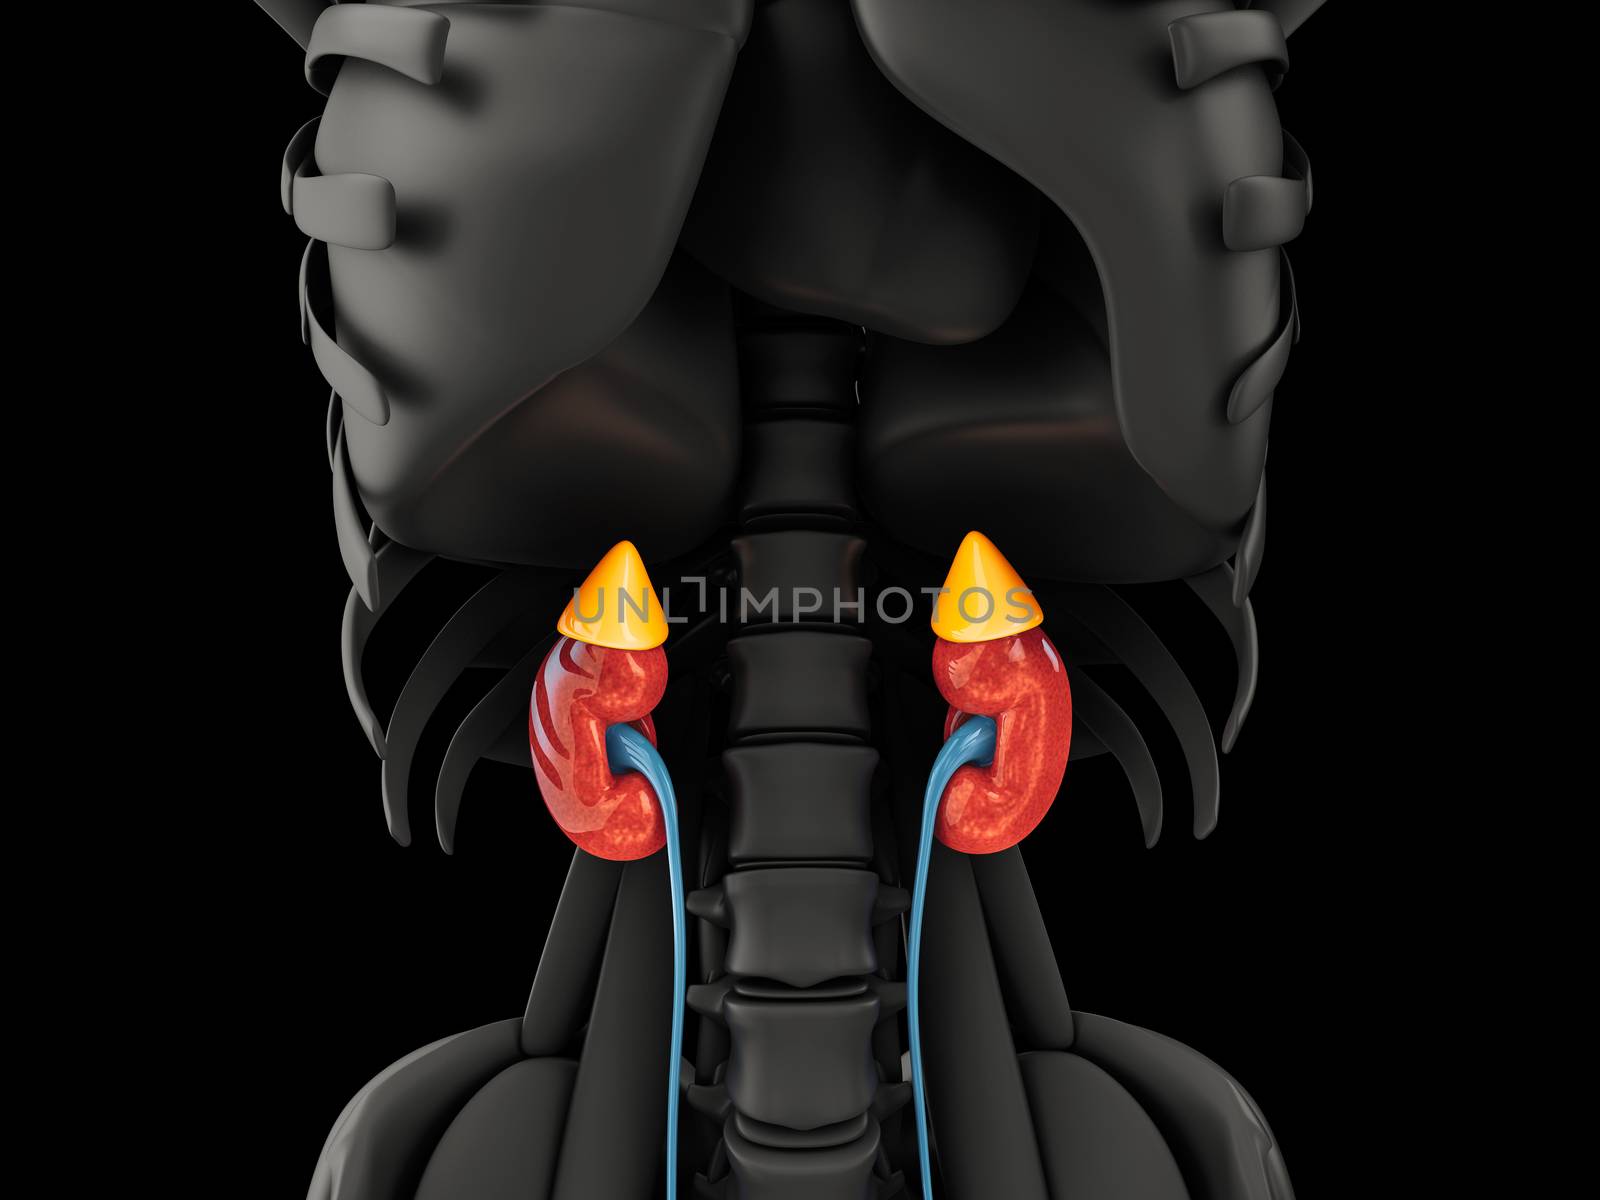 3d illustration of the kidney. Science medical educational material, clipping path included by tussik